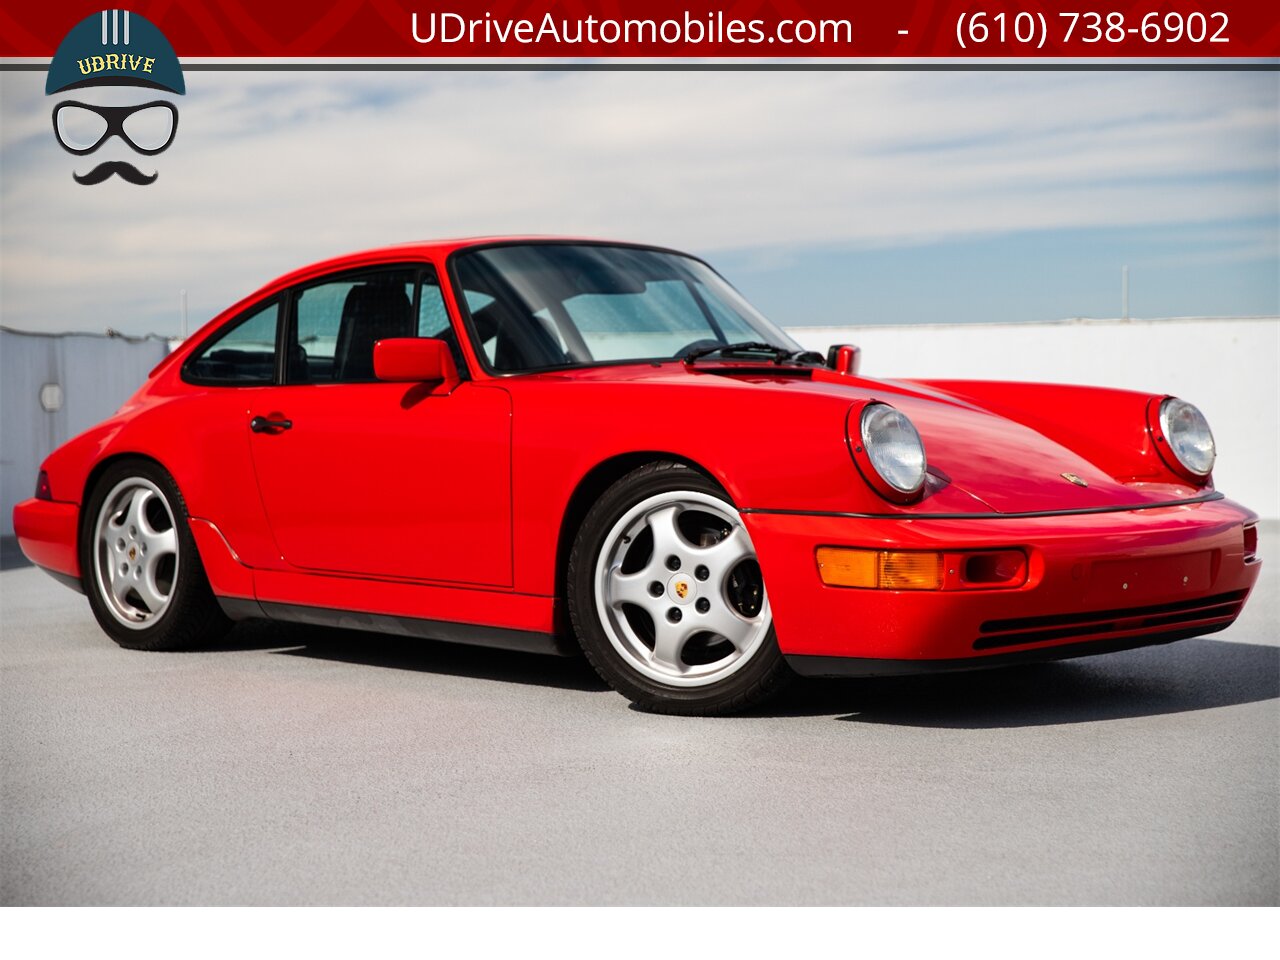 1989 Porsche 911 Carrera 4 964 C4 5 Speed Engine Rebuild  $40k in Service History Cup 1 Wheels - Photo 3 - West Chester, PA 19382